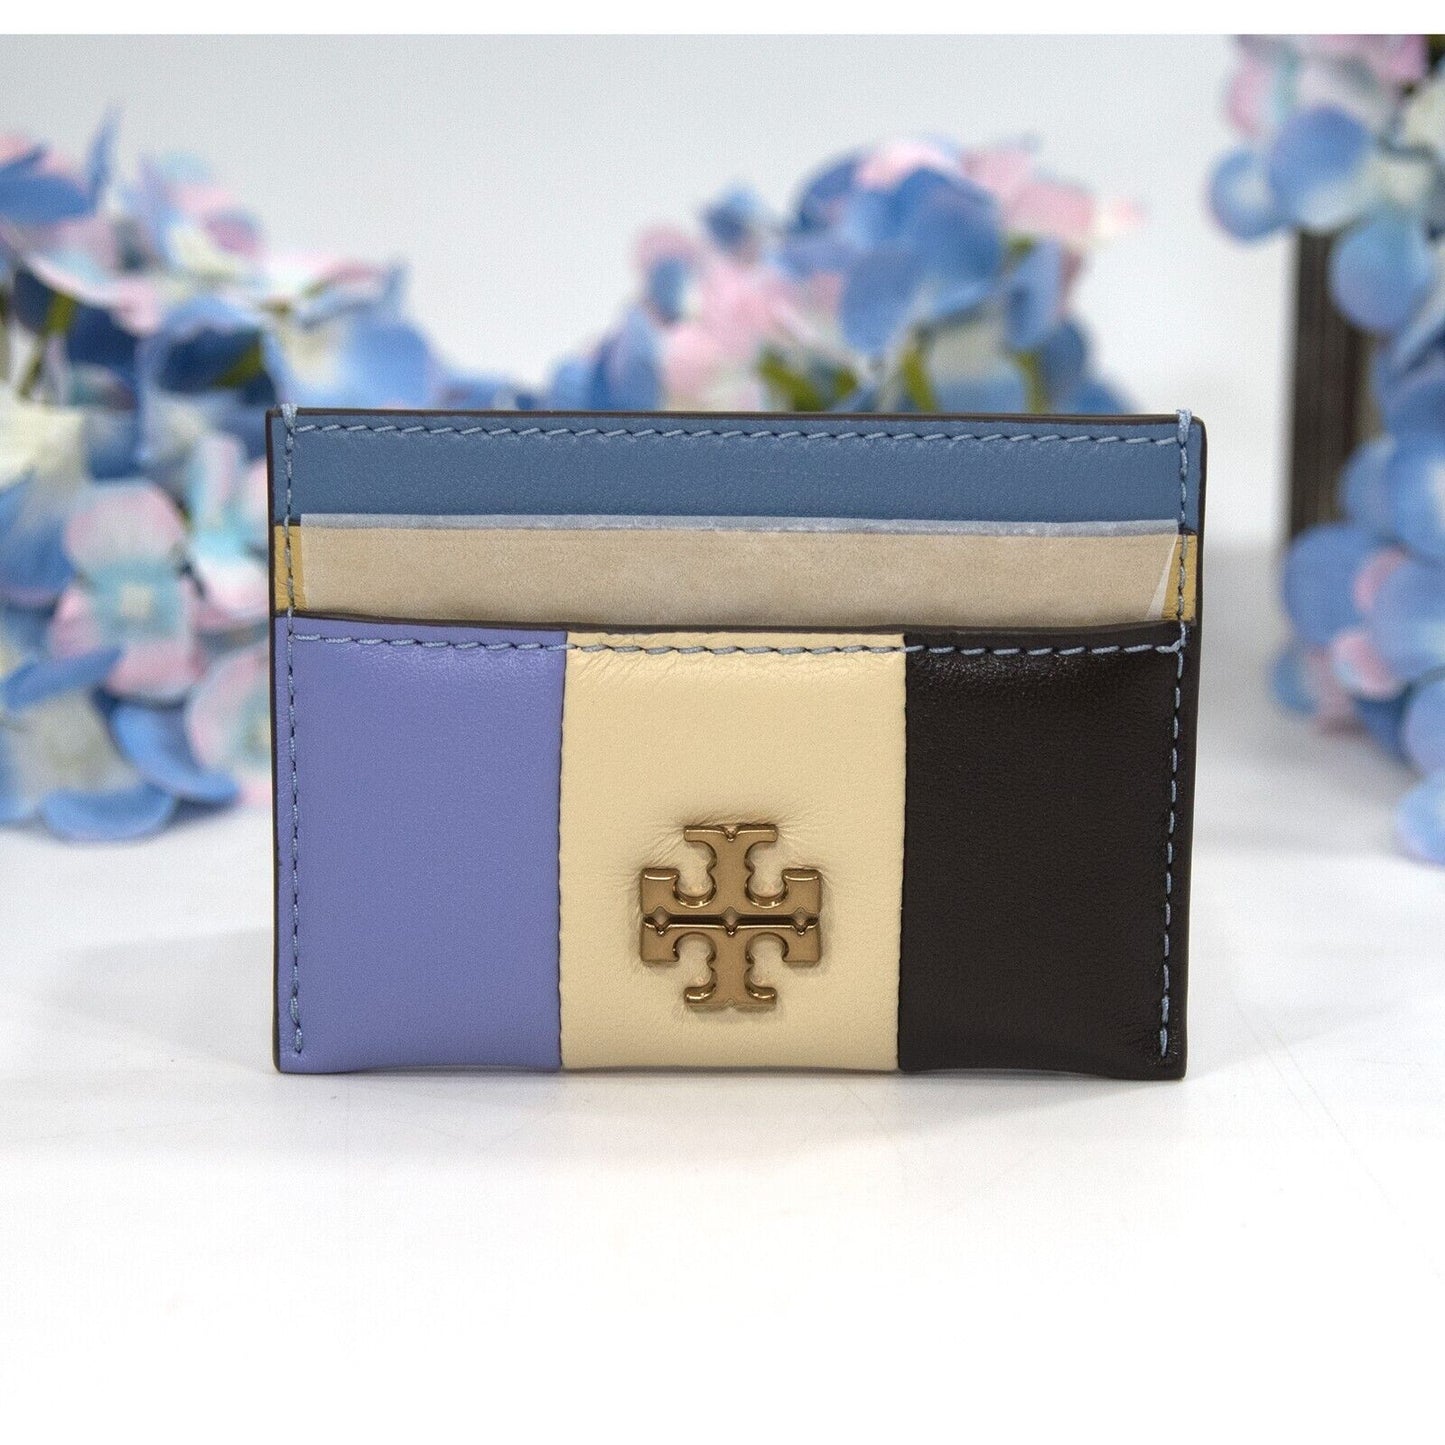 Tory Burch Leather Kira Patchwork Quilted Logo Card Case Mini Wallet NWT